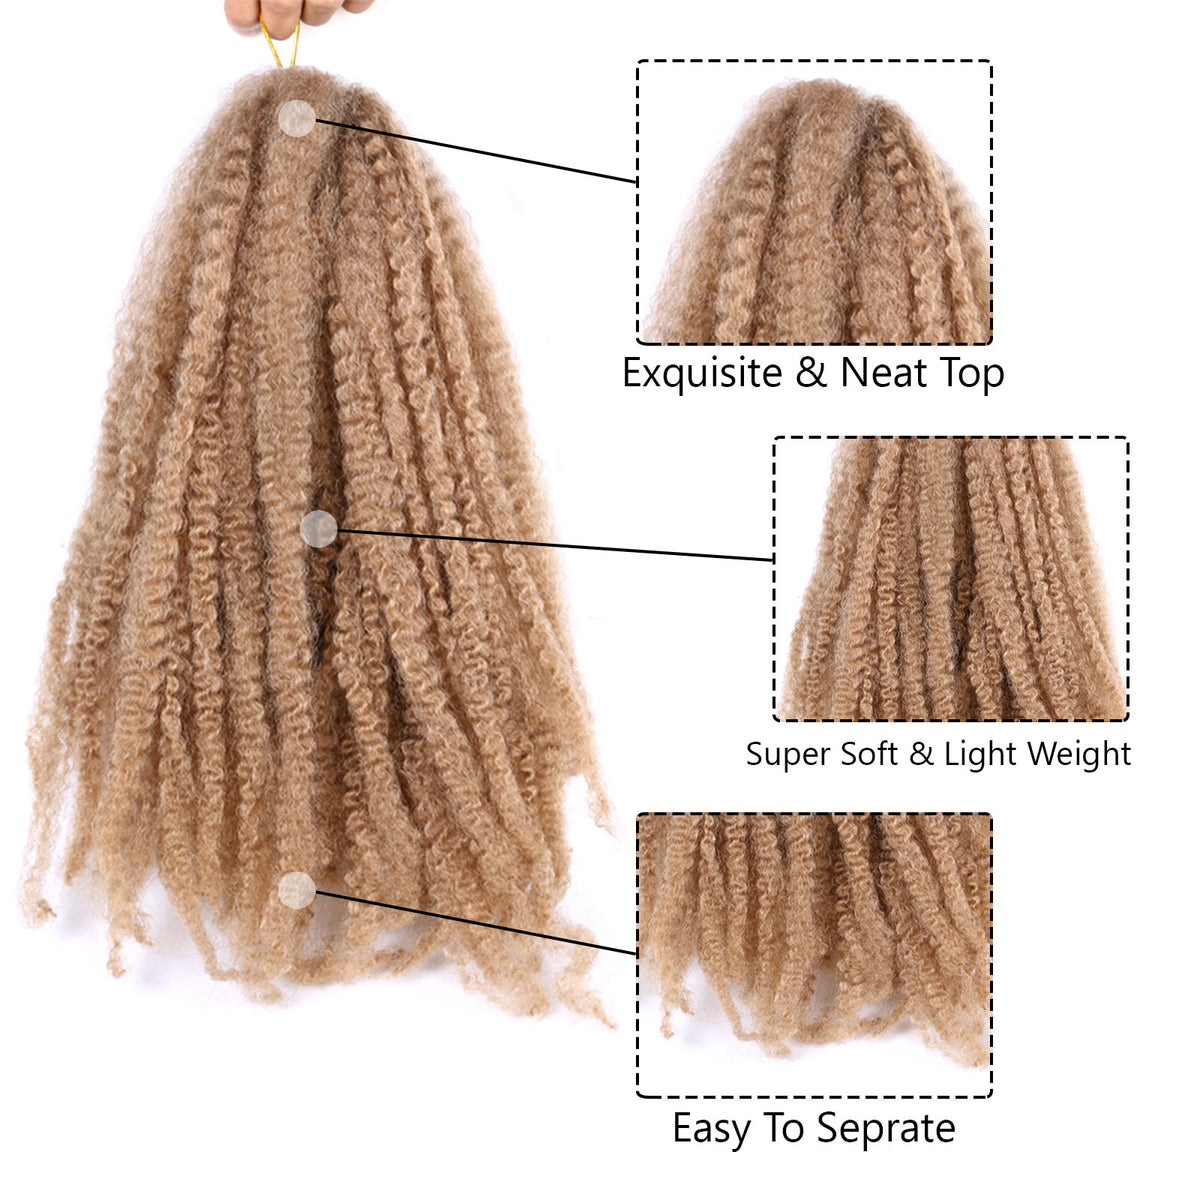 18 Inches Pack of 3 Marley Hair For Faux Locs Soft & Bouncy Cuban Twist Hair Synthetic Kanekalon Kinky Twist Hair For Braiding Crochet Marley Twist Braiding Hair For Black Woman #27